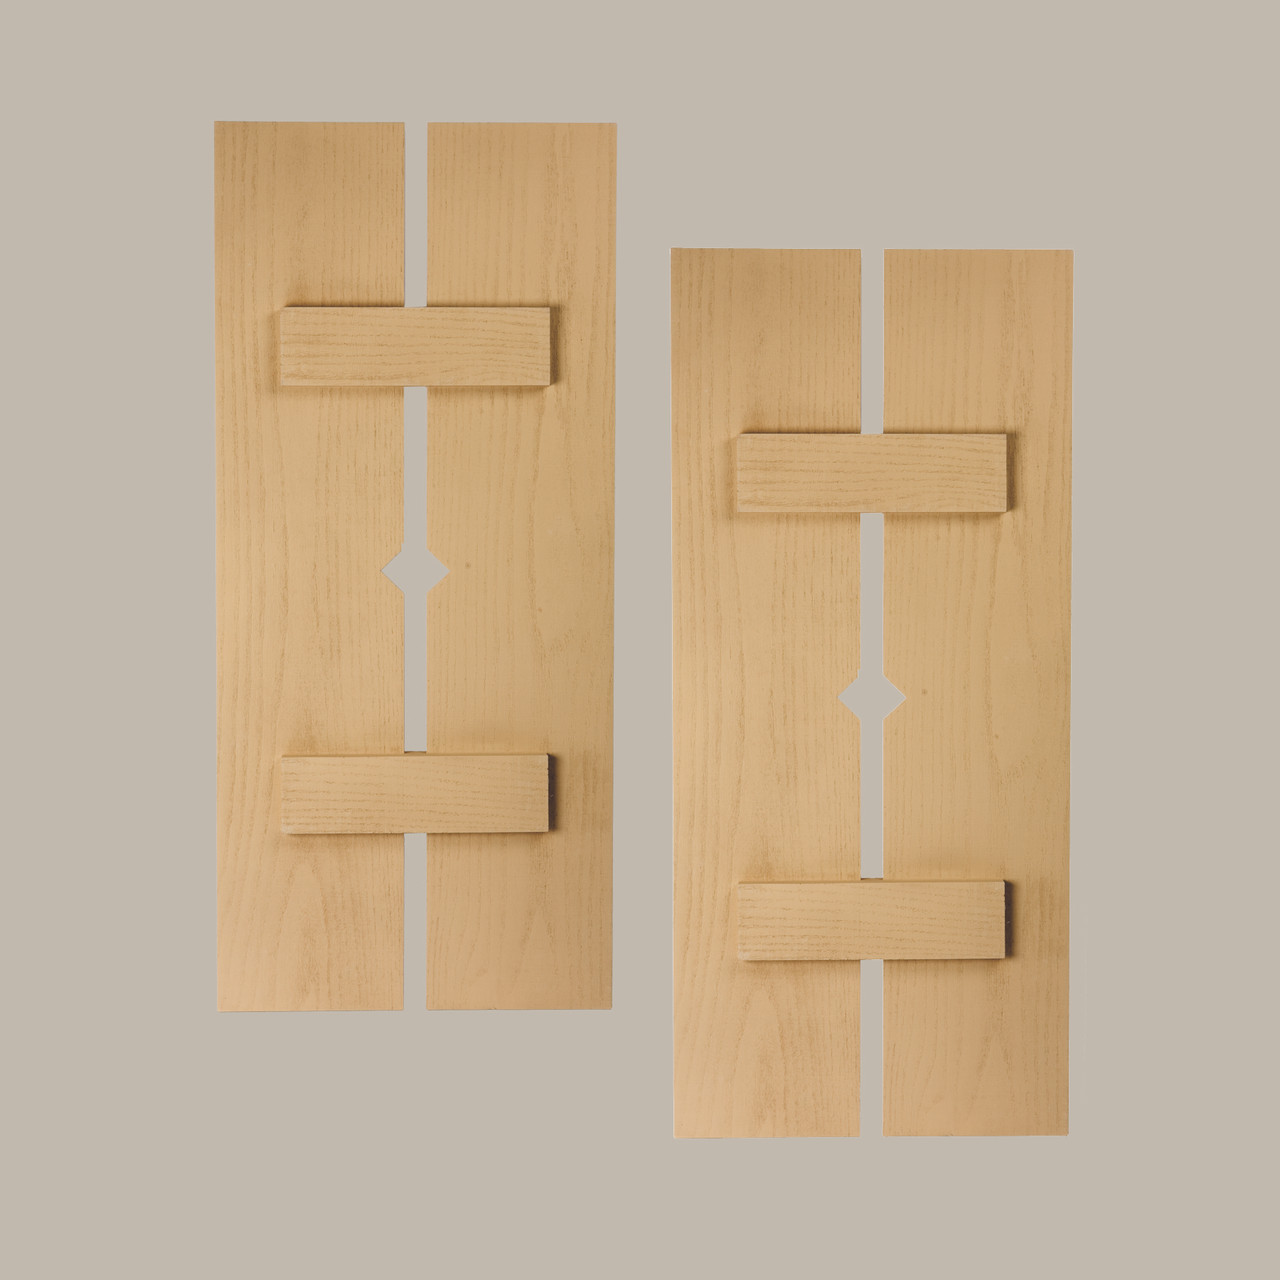 12 inch by 40 inch Plank Shutter with 2-Plank, Diamond